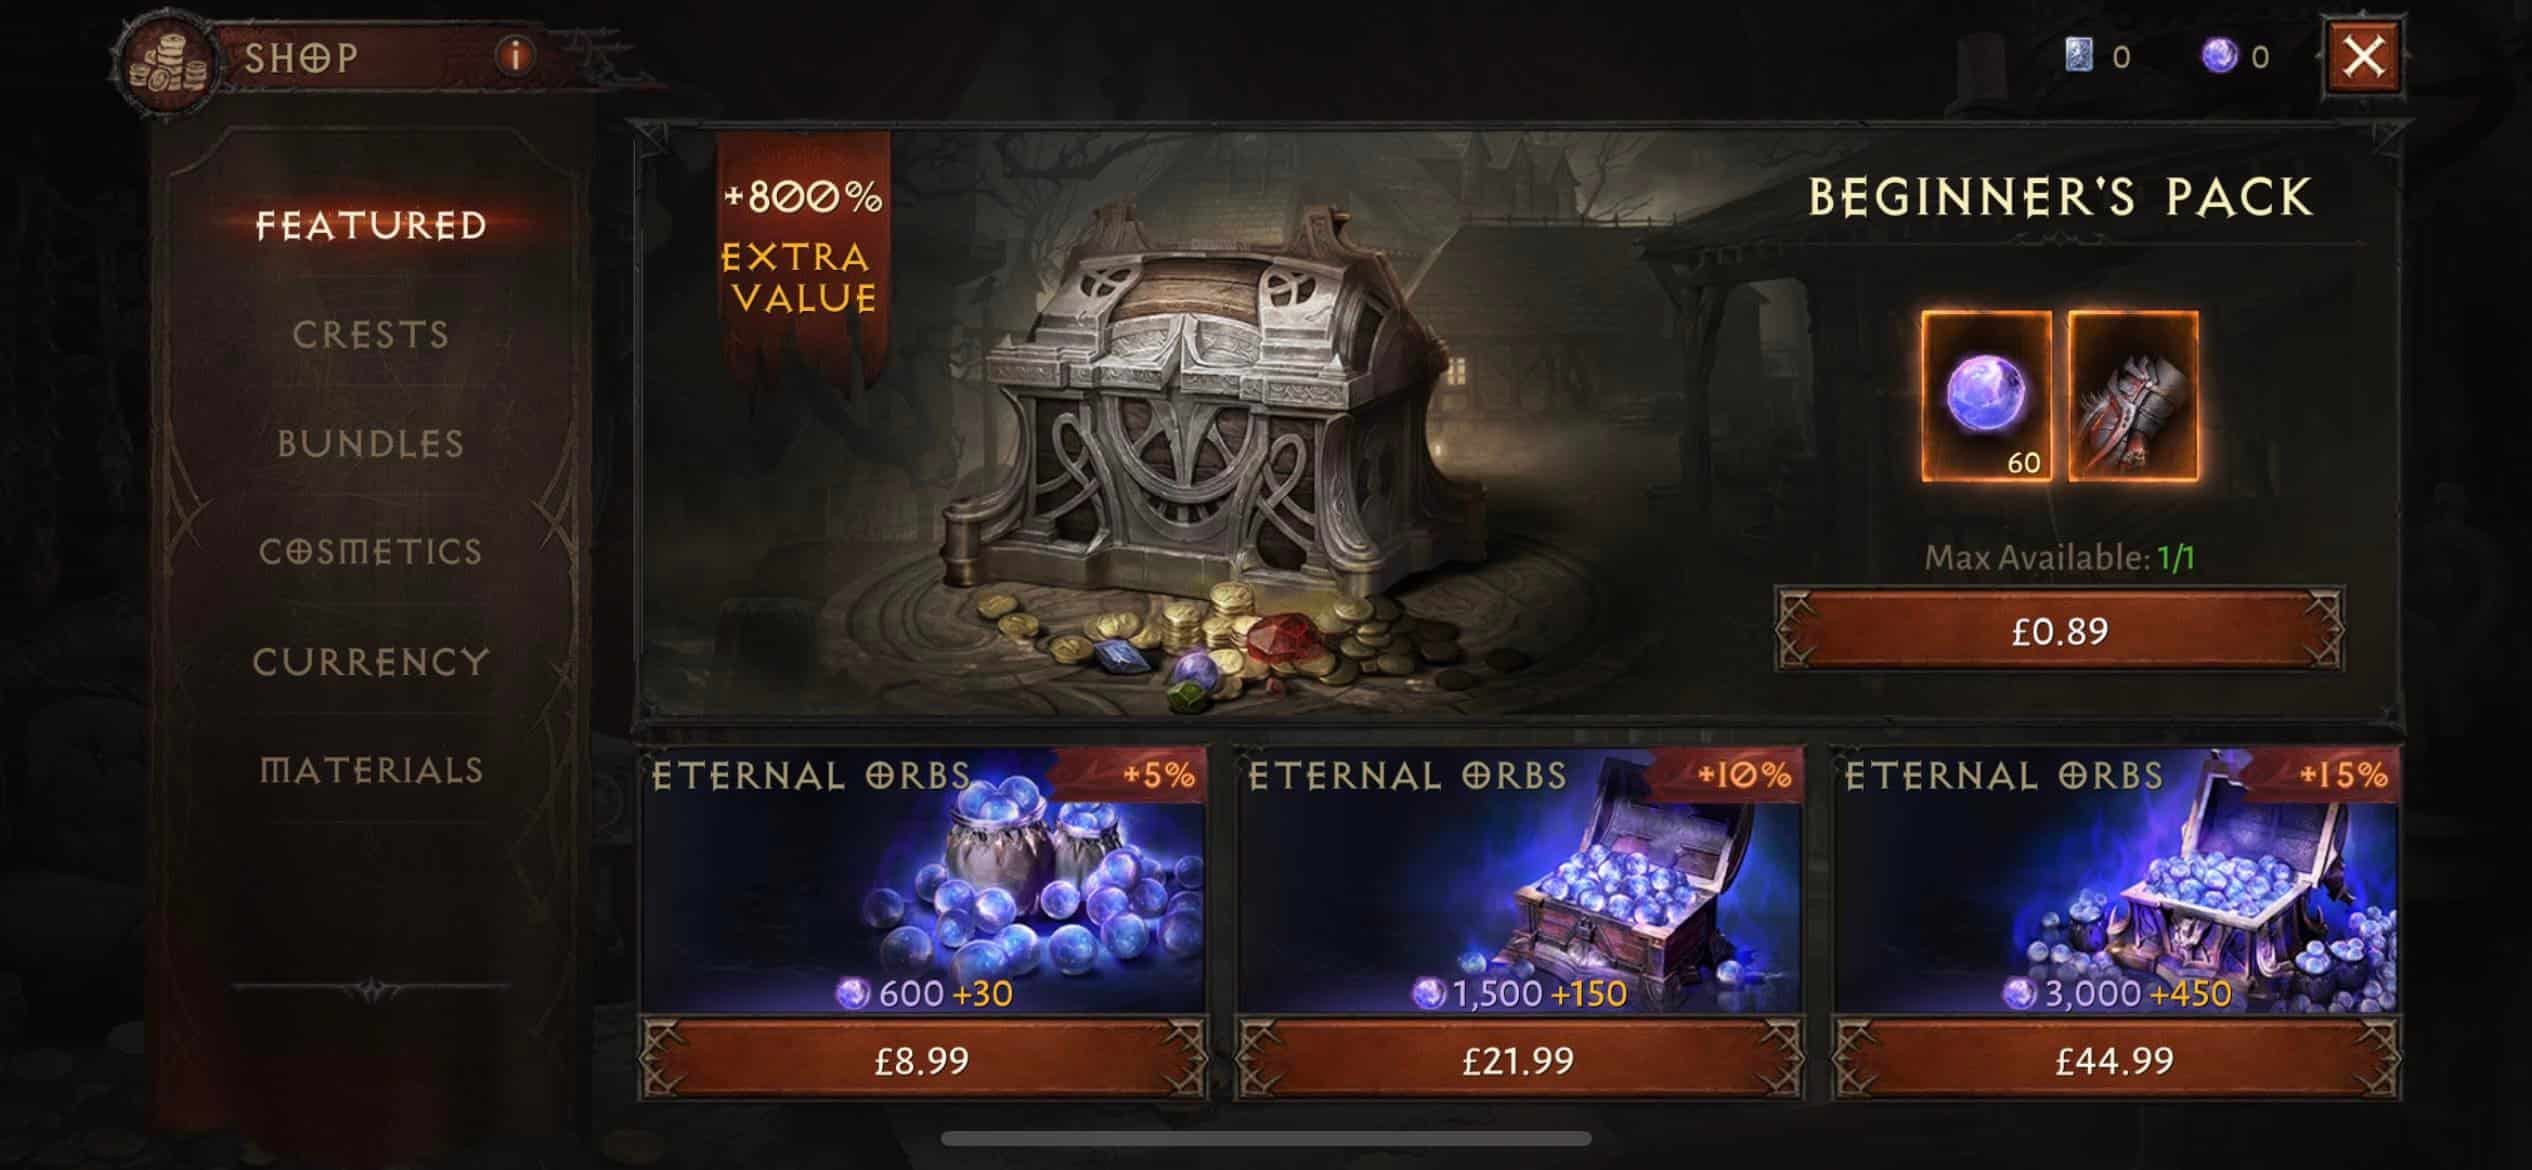 diablo immortal store with beginner's chest and eternal orbs